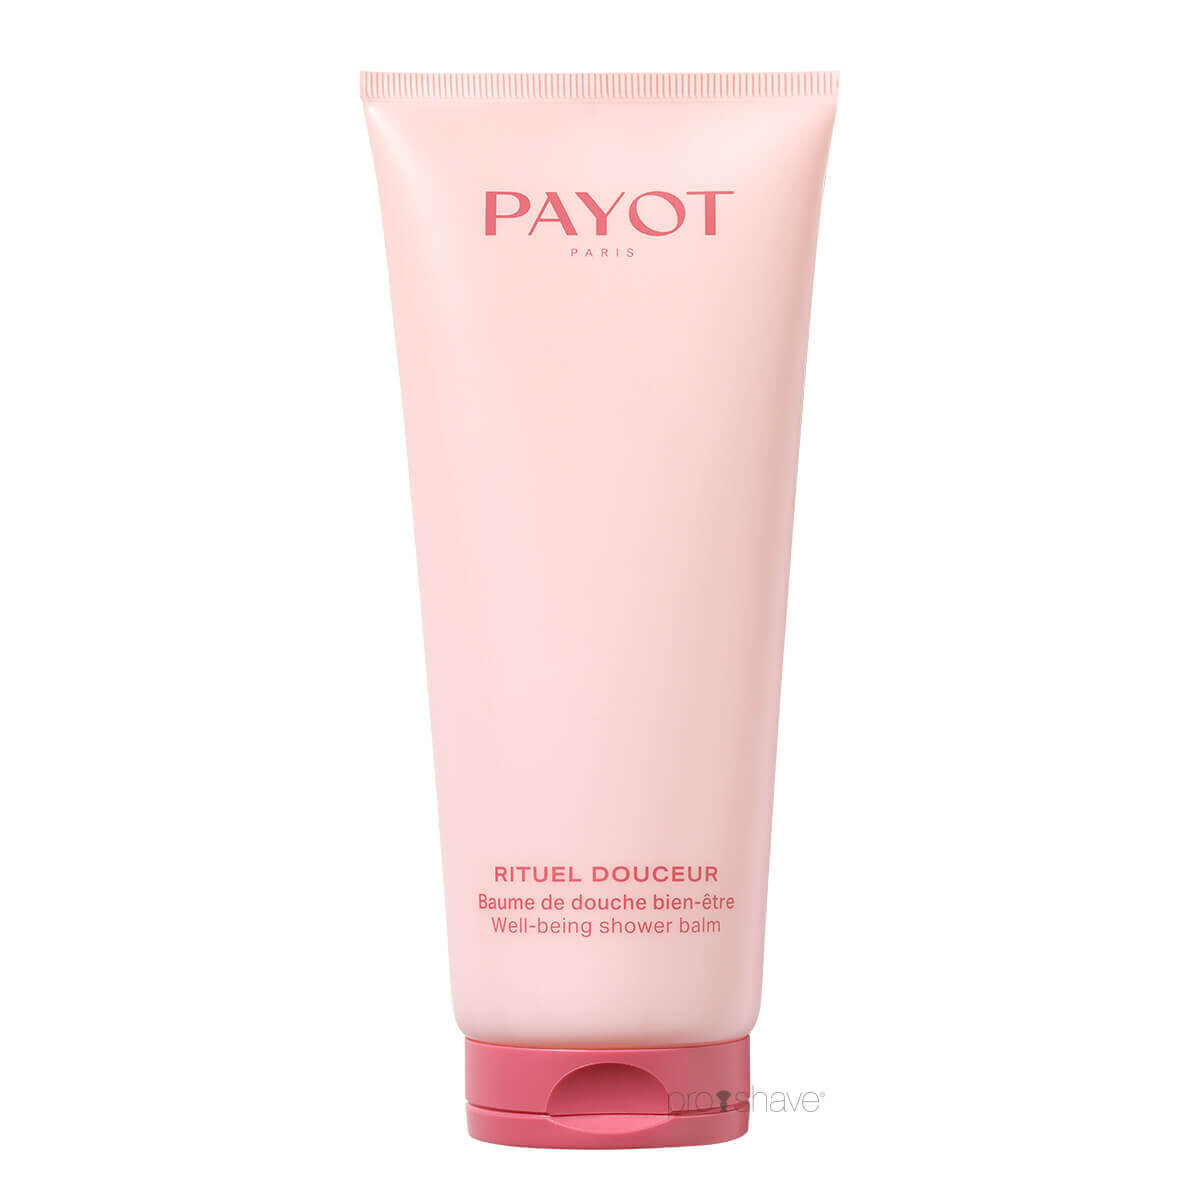 Se Payot Well-being Shower Balm, Rituel Douceur, 200 ml. hos Proshave